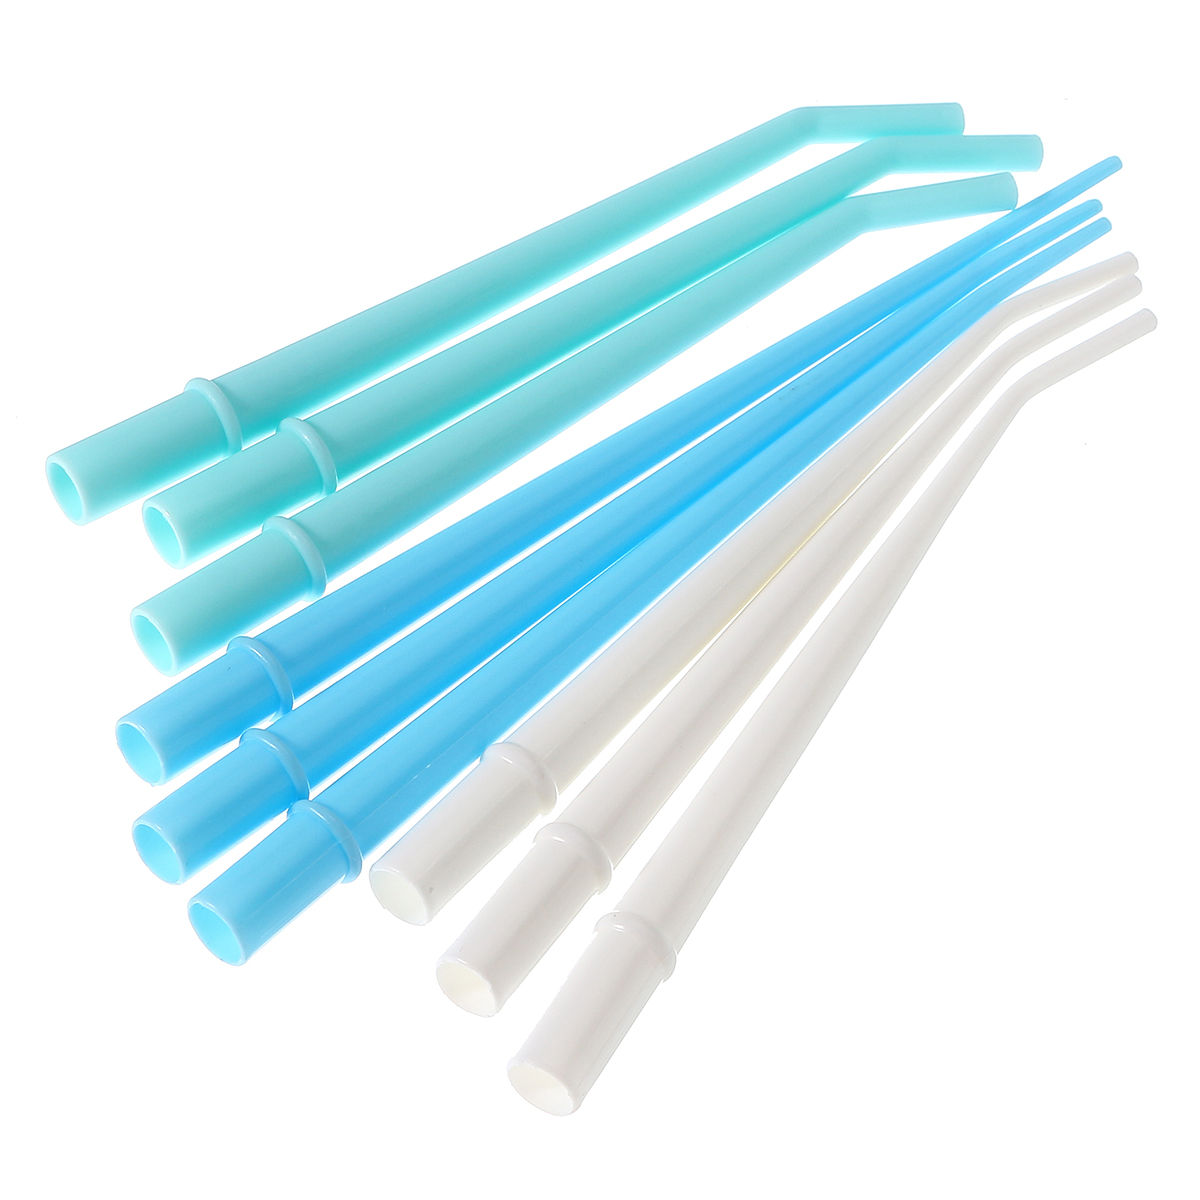 Plastic-Curved-Tips-Surgical-Aspirator-Dental-Tools-Saliva-Ejector-Tips-Disposable-Suction-Tube-1381854-10